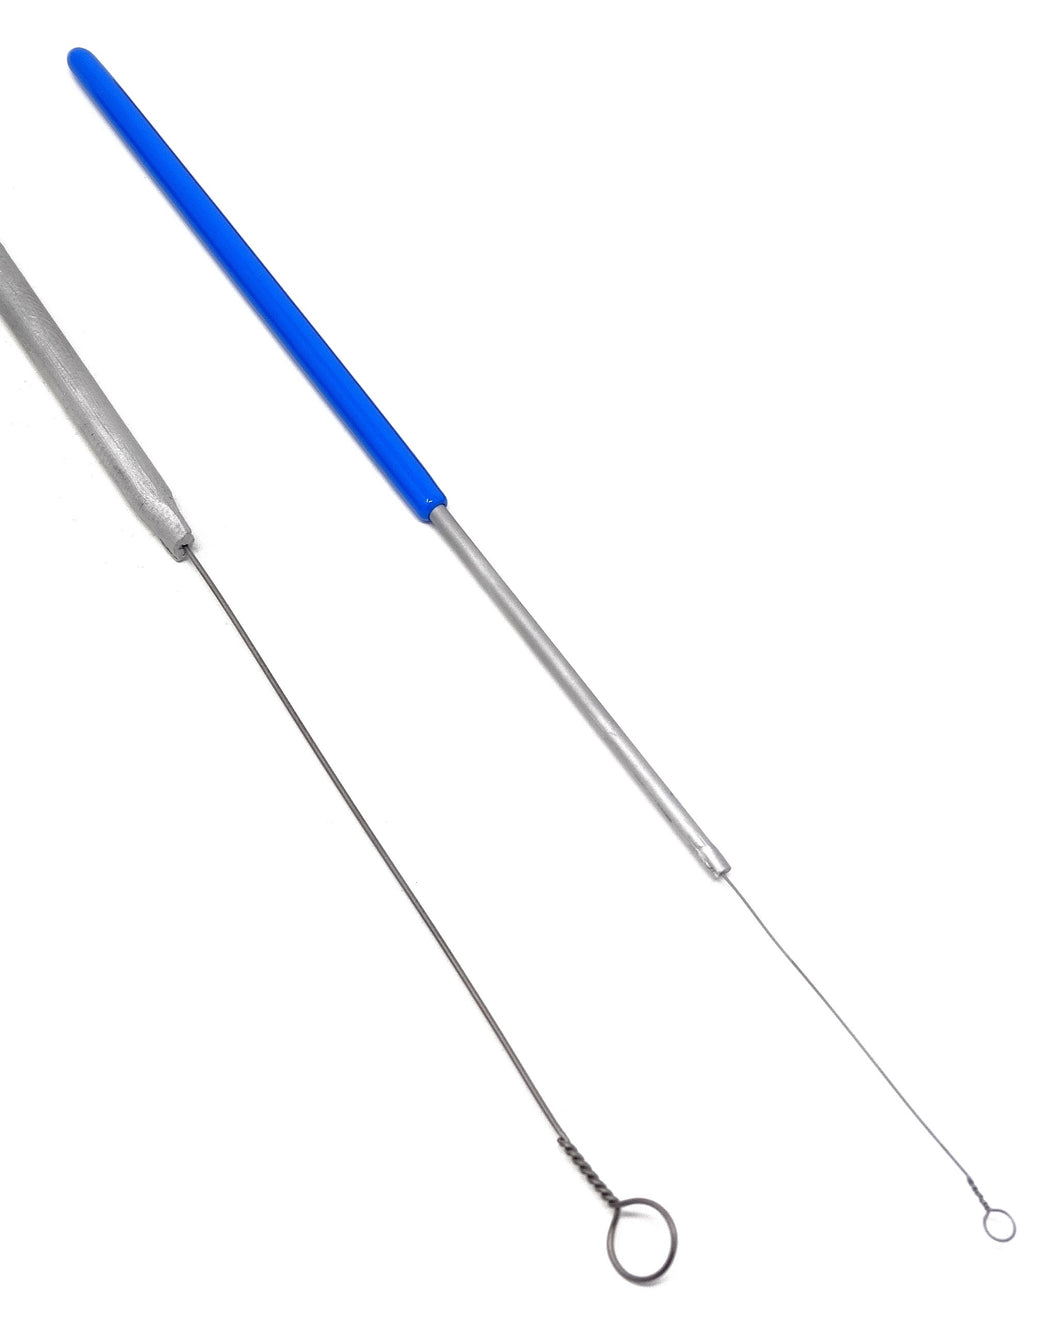 A2ZSCILAB Bacterial Inoculating Loop 4 mm, Single Nichrome Wire, With Insulated Aluminum Handle